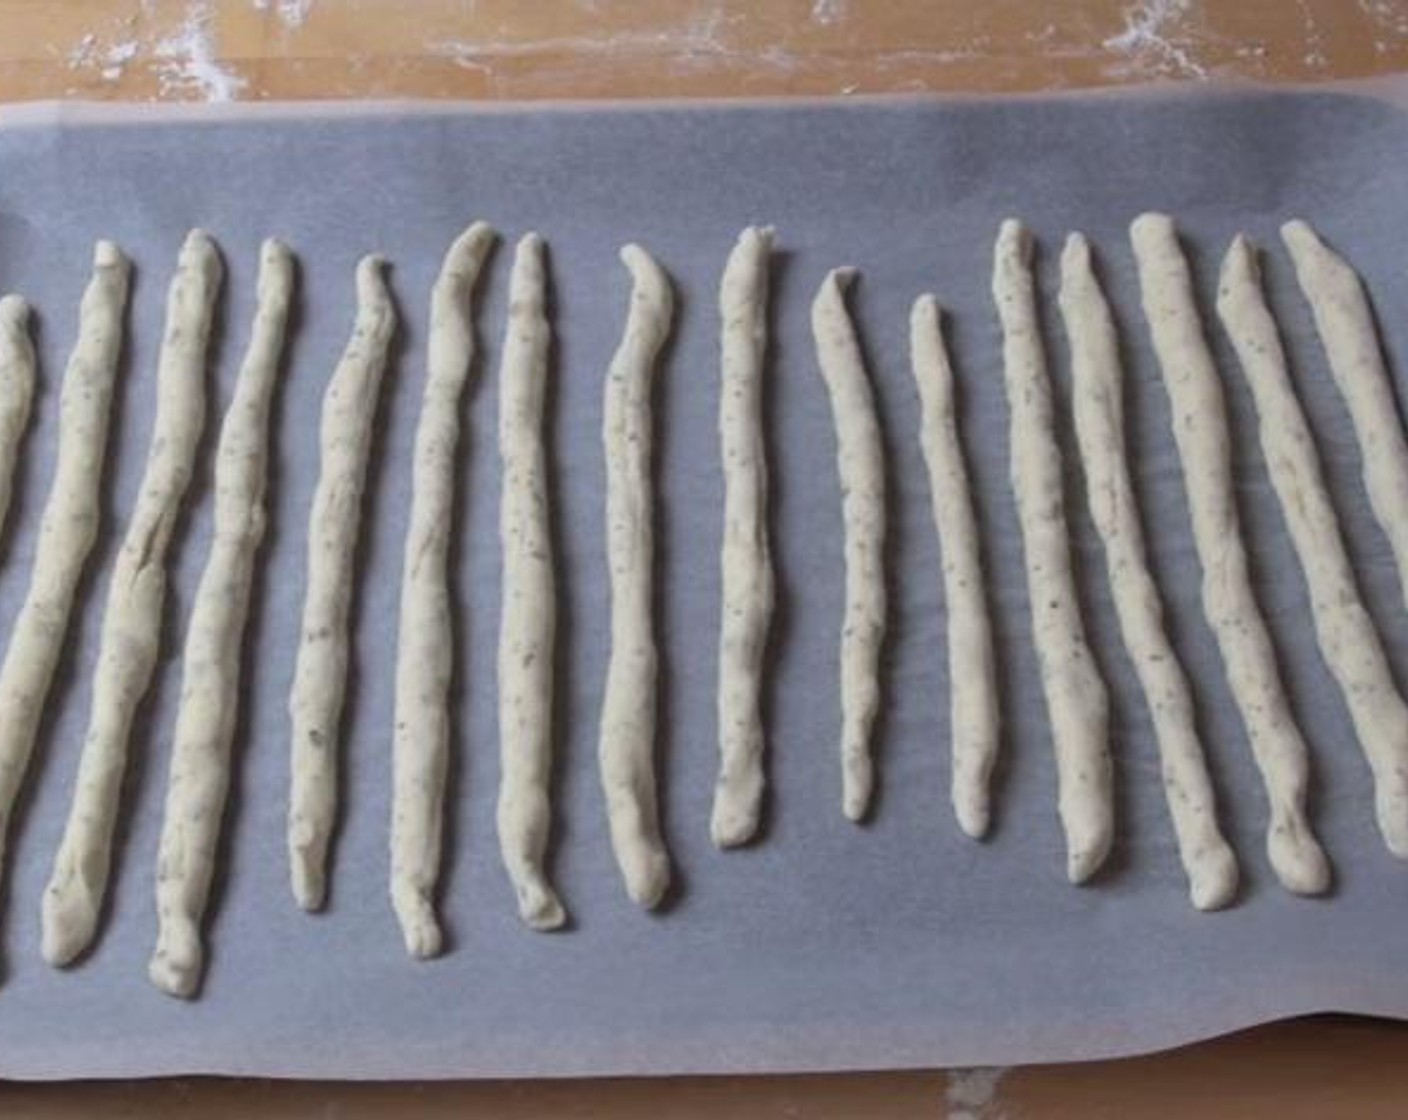 step 6 Lay your bread sticks on an oven plate. Brush each bread stick with some Olive Oil (2 Tbsp), season with some Salt (1/2 tsp), and bake inside an oven at 200 degrees C (400 degrees F) for about 15 minutes.